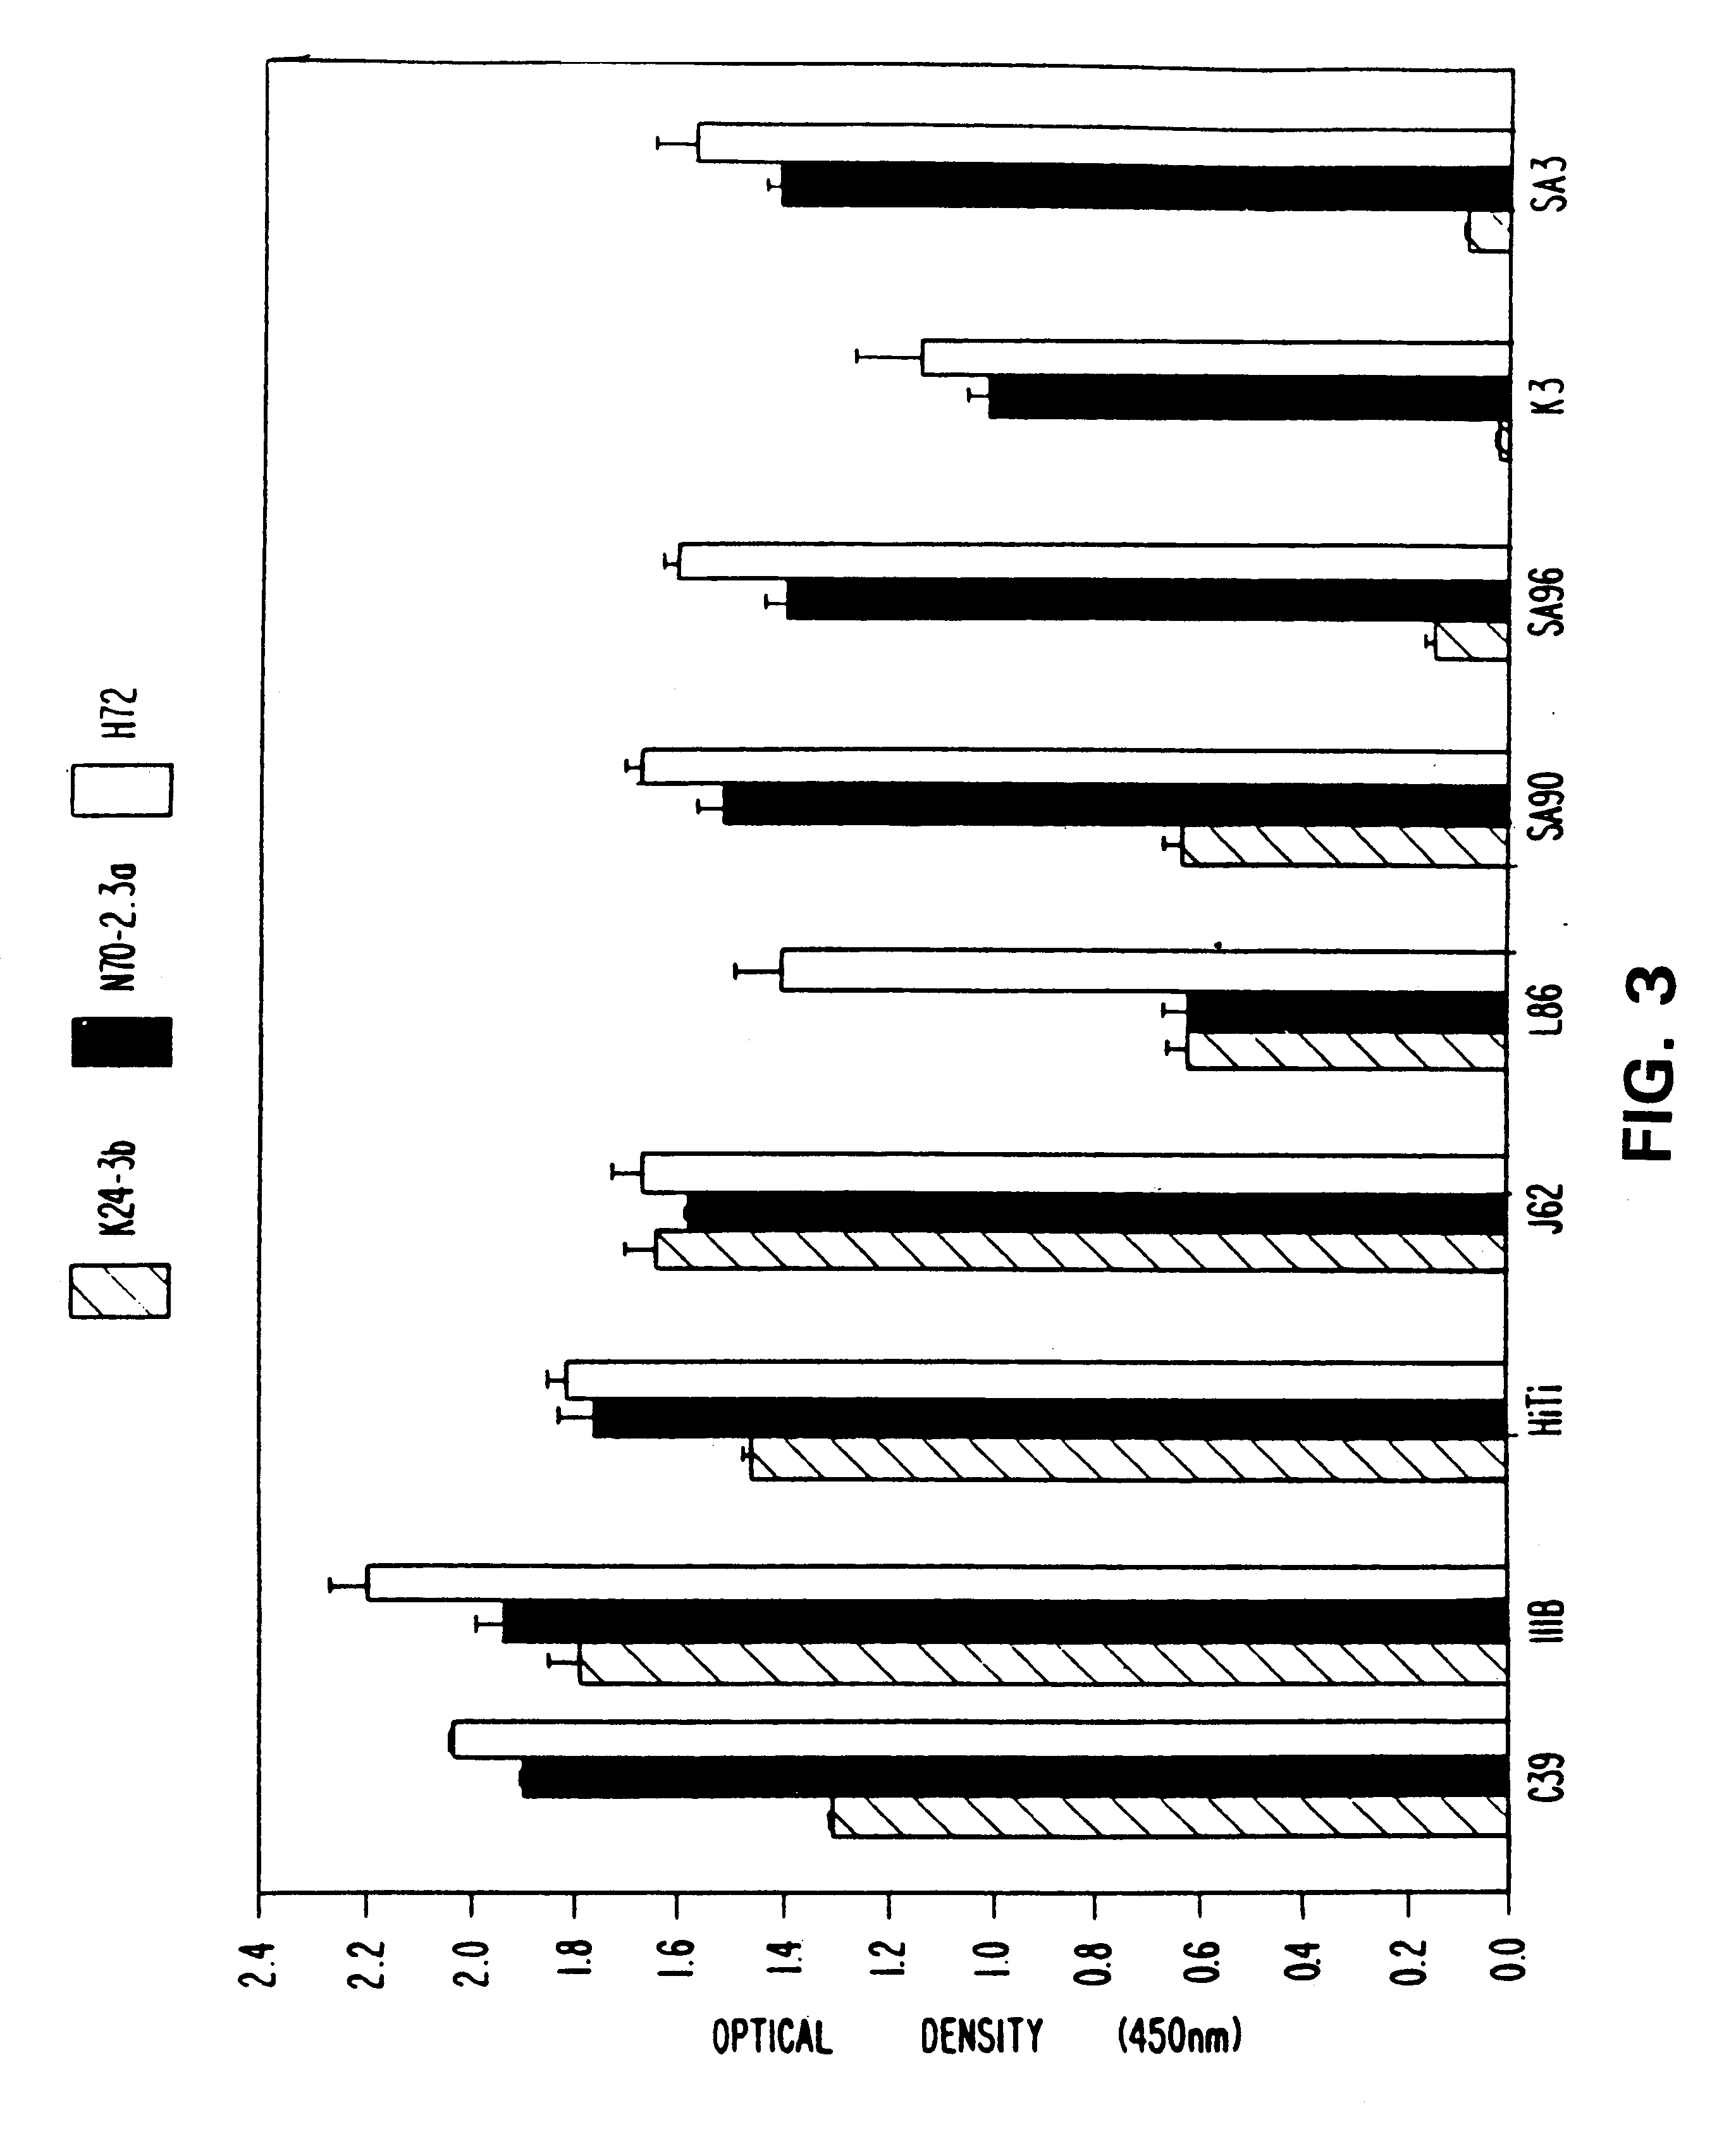 Immunoreagents reactive with a conserved epitope of human immunodeficiency virus type I (HIV-1) gp120 and methods of use